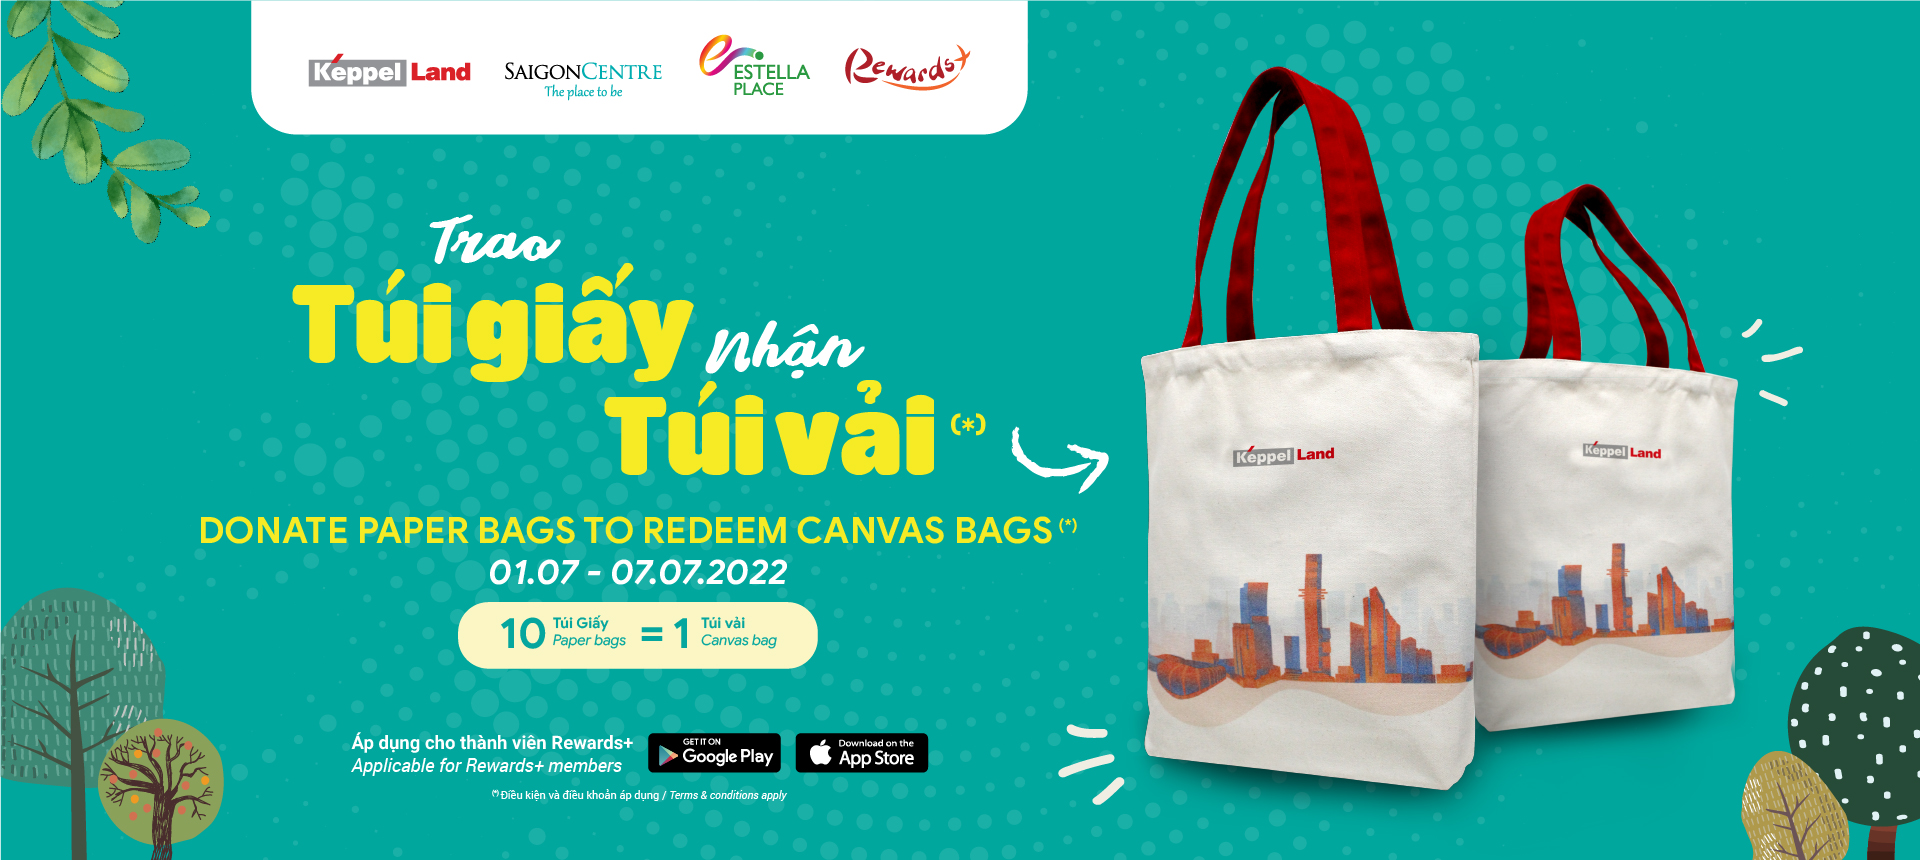 DONATE PAPER BAGS TO REDEEM CANVAS BAGS